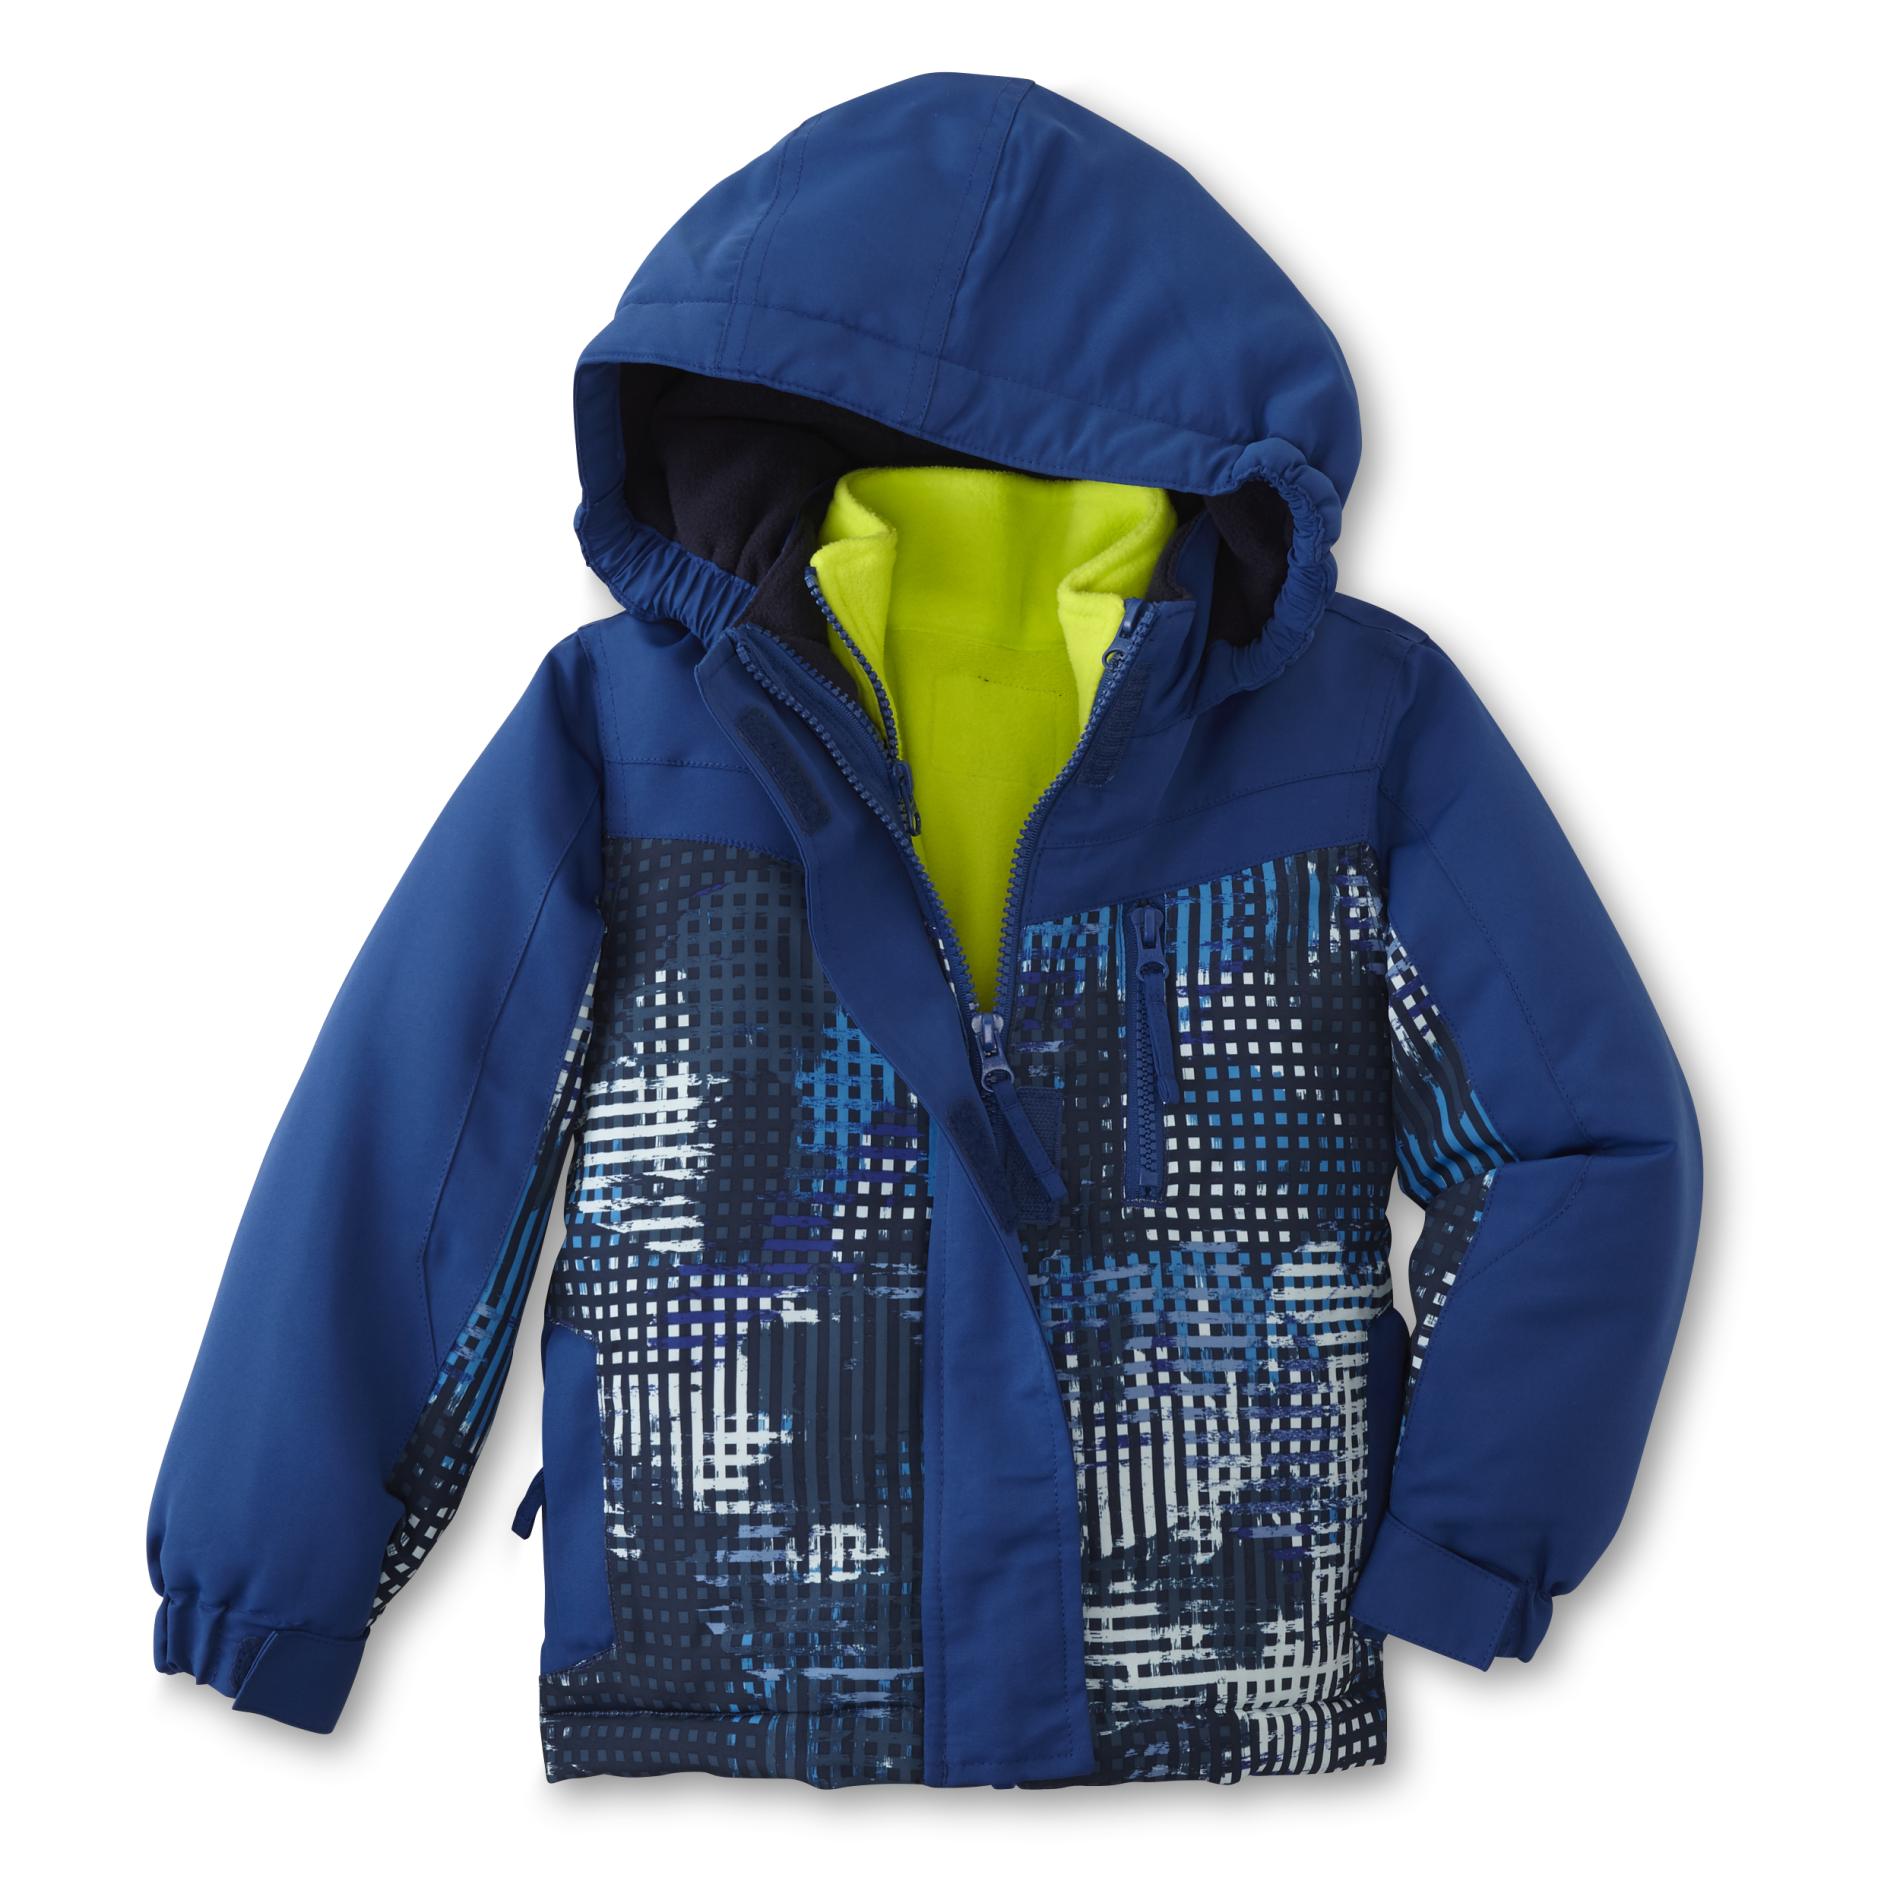 Athletech Infant & Toddler Boys' 3-Way Winter Coat - Abstract